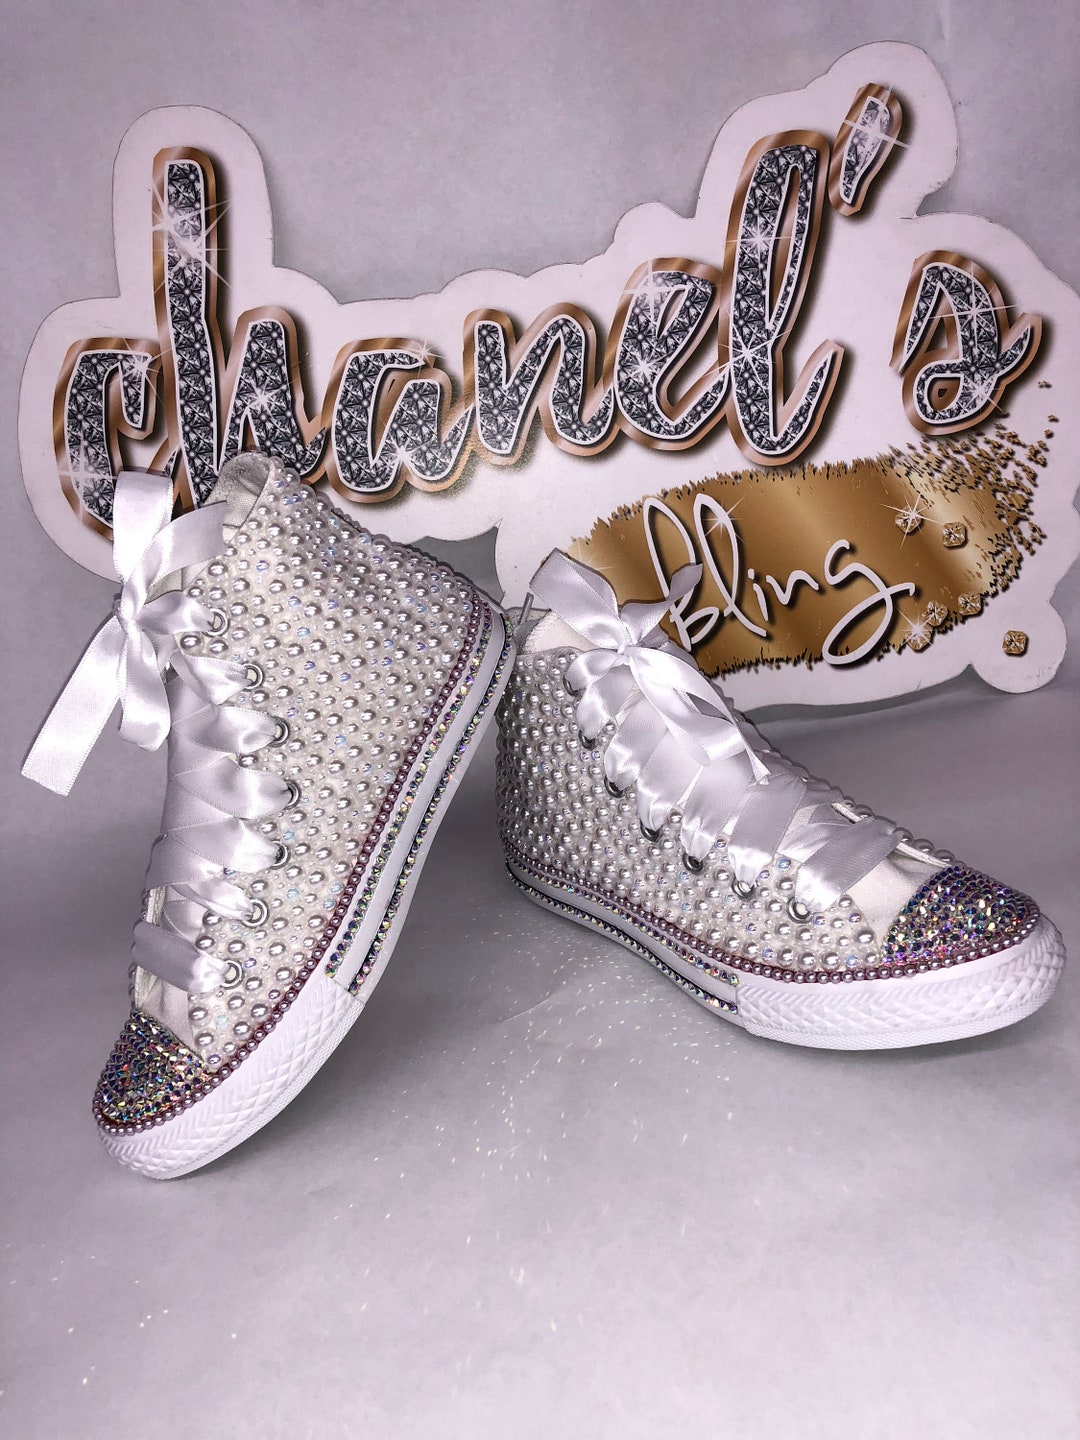 KIDS White Glam Bling Converse All Star Chuck Taylor Sneakers - Etsy